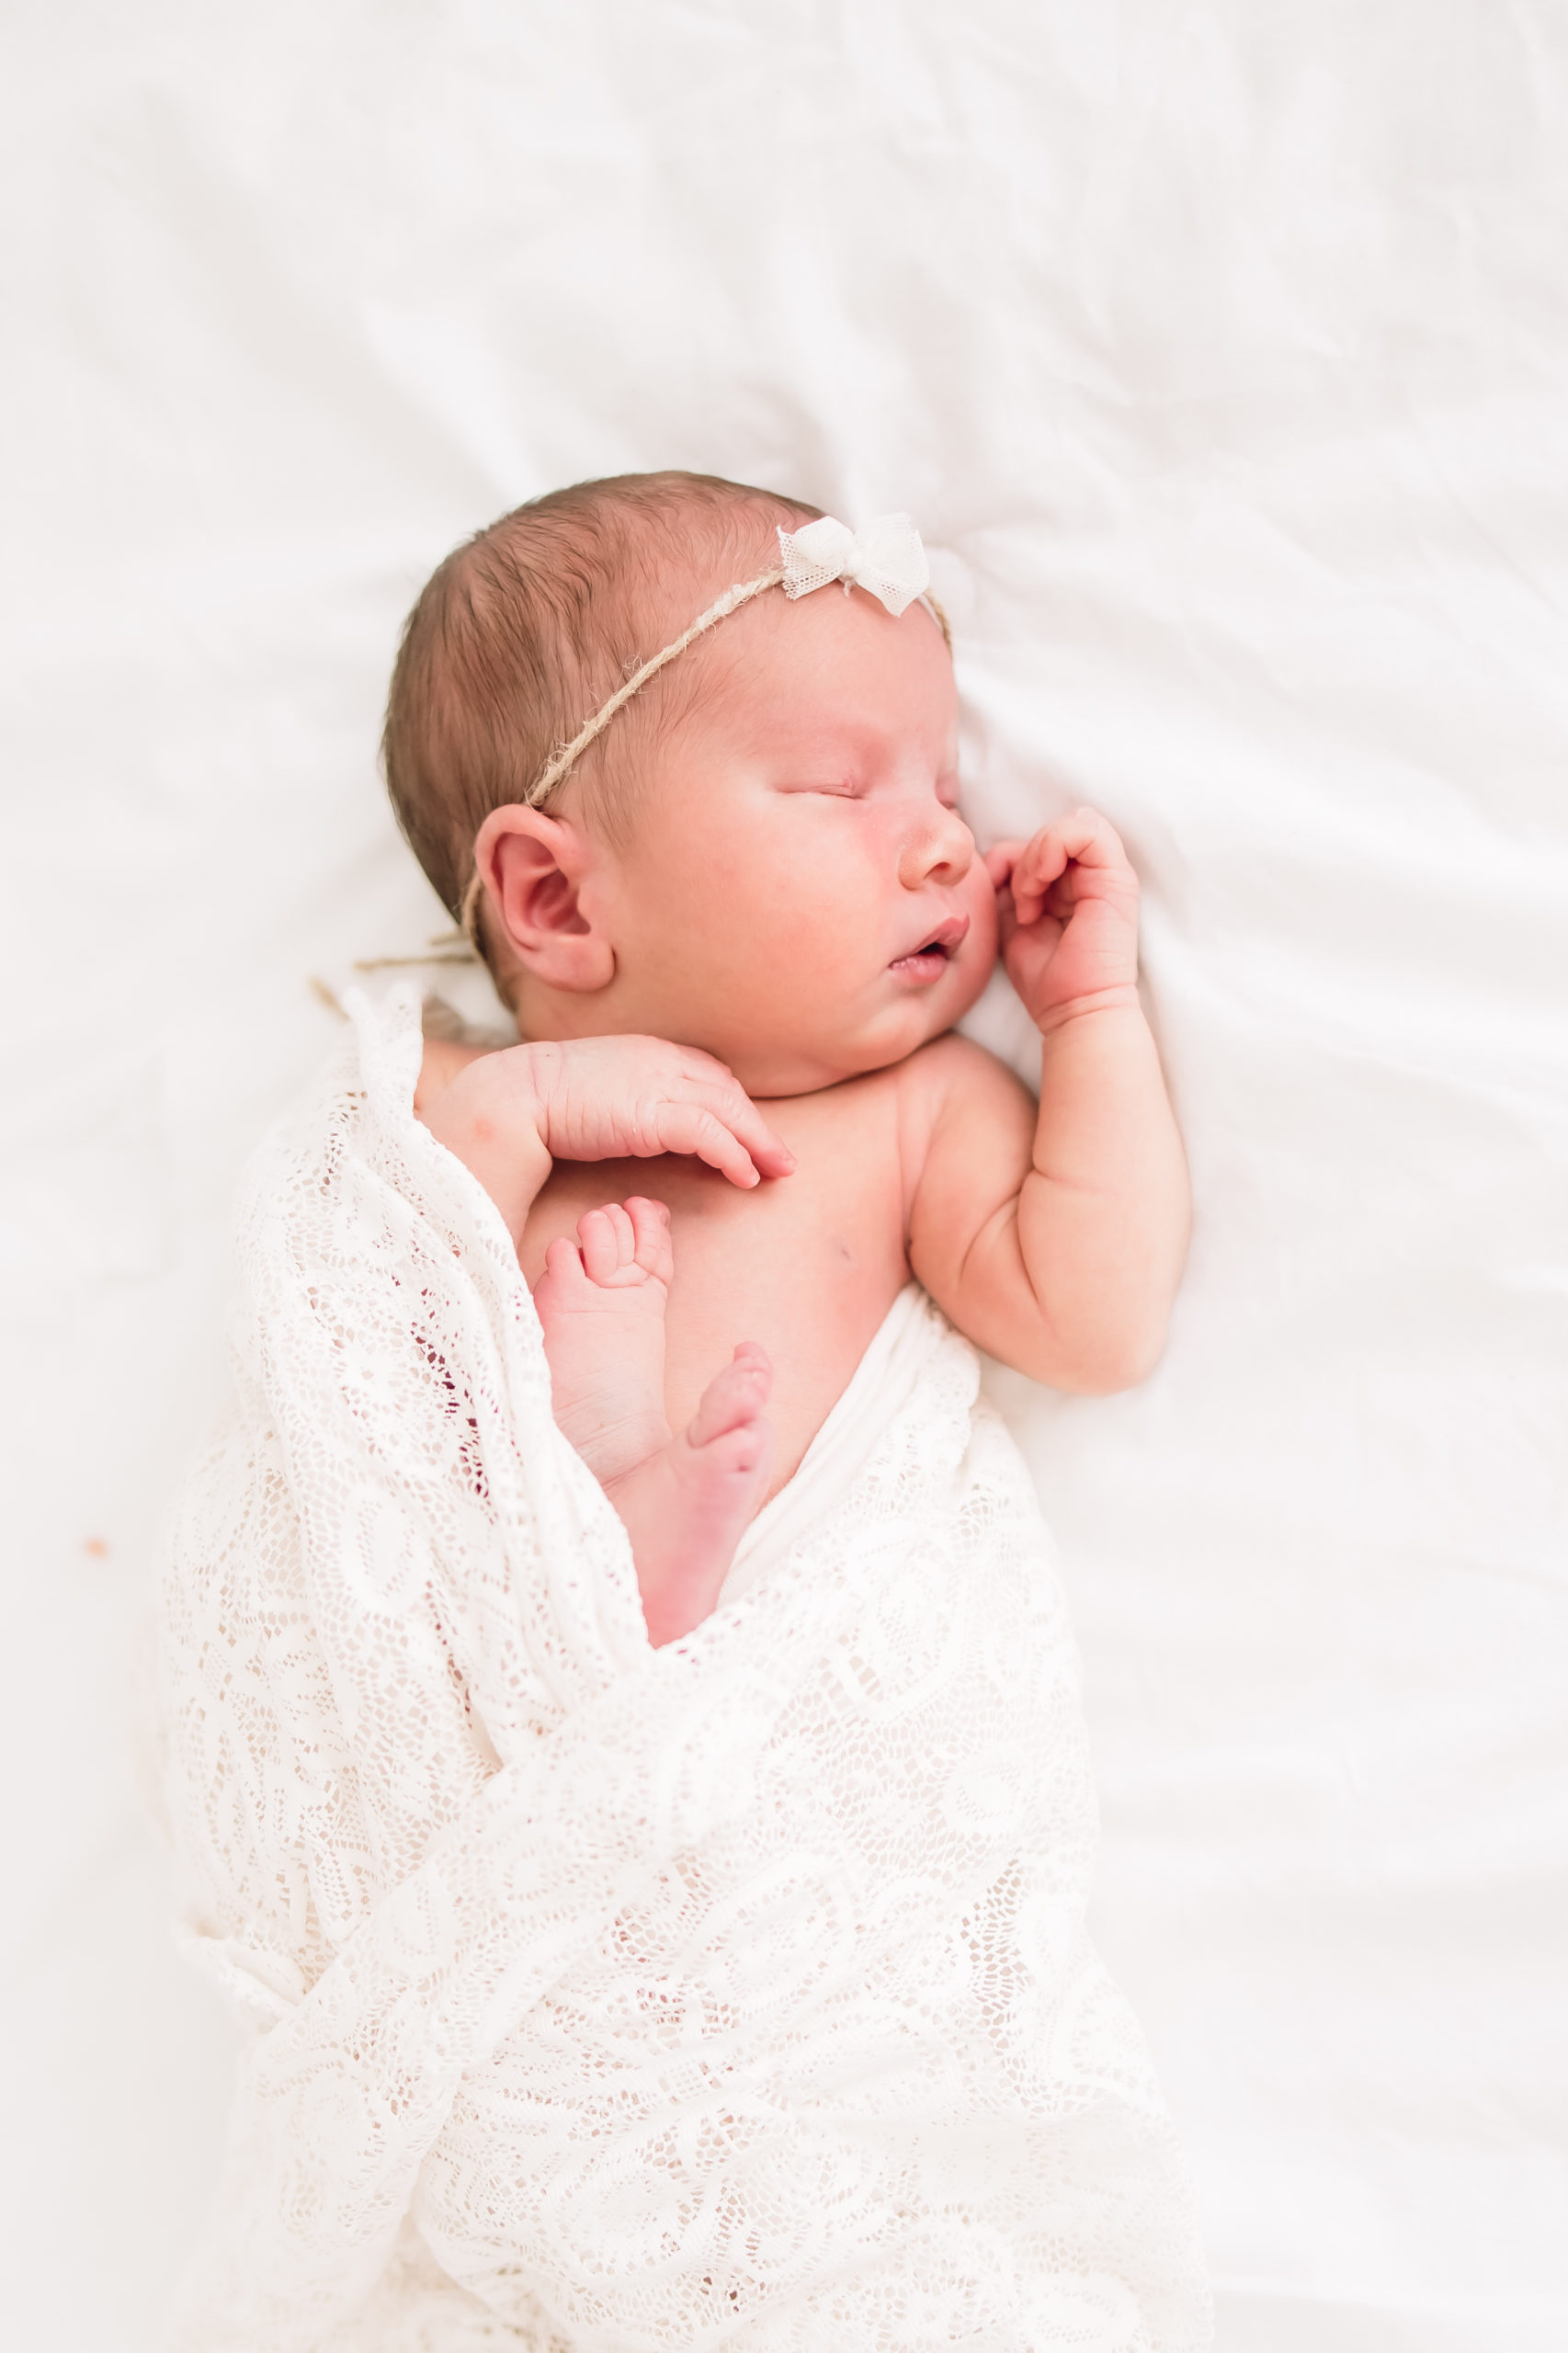 Newborn baby wearing a beautiful lace wrap and bow while sleeping in a bright white studio taken by a newborn photographer in Louisville